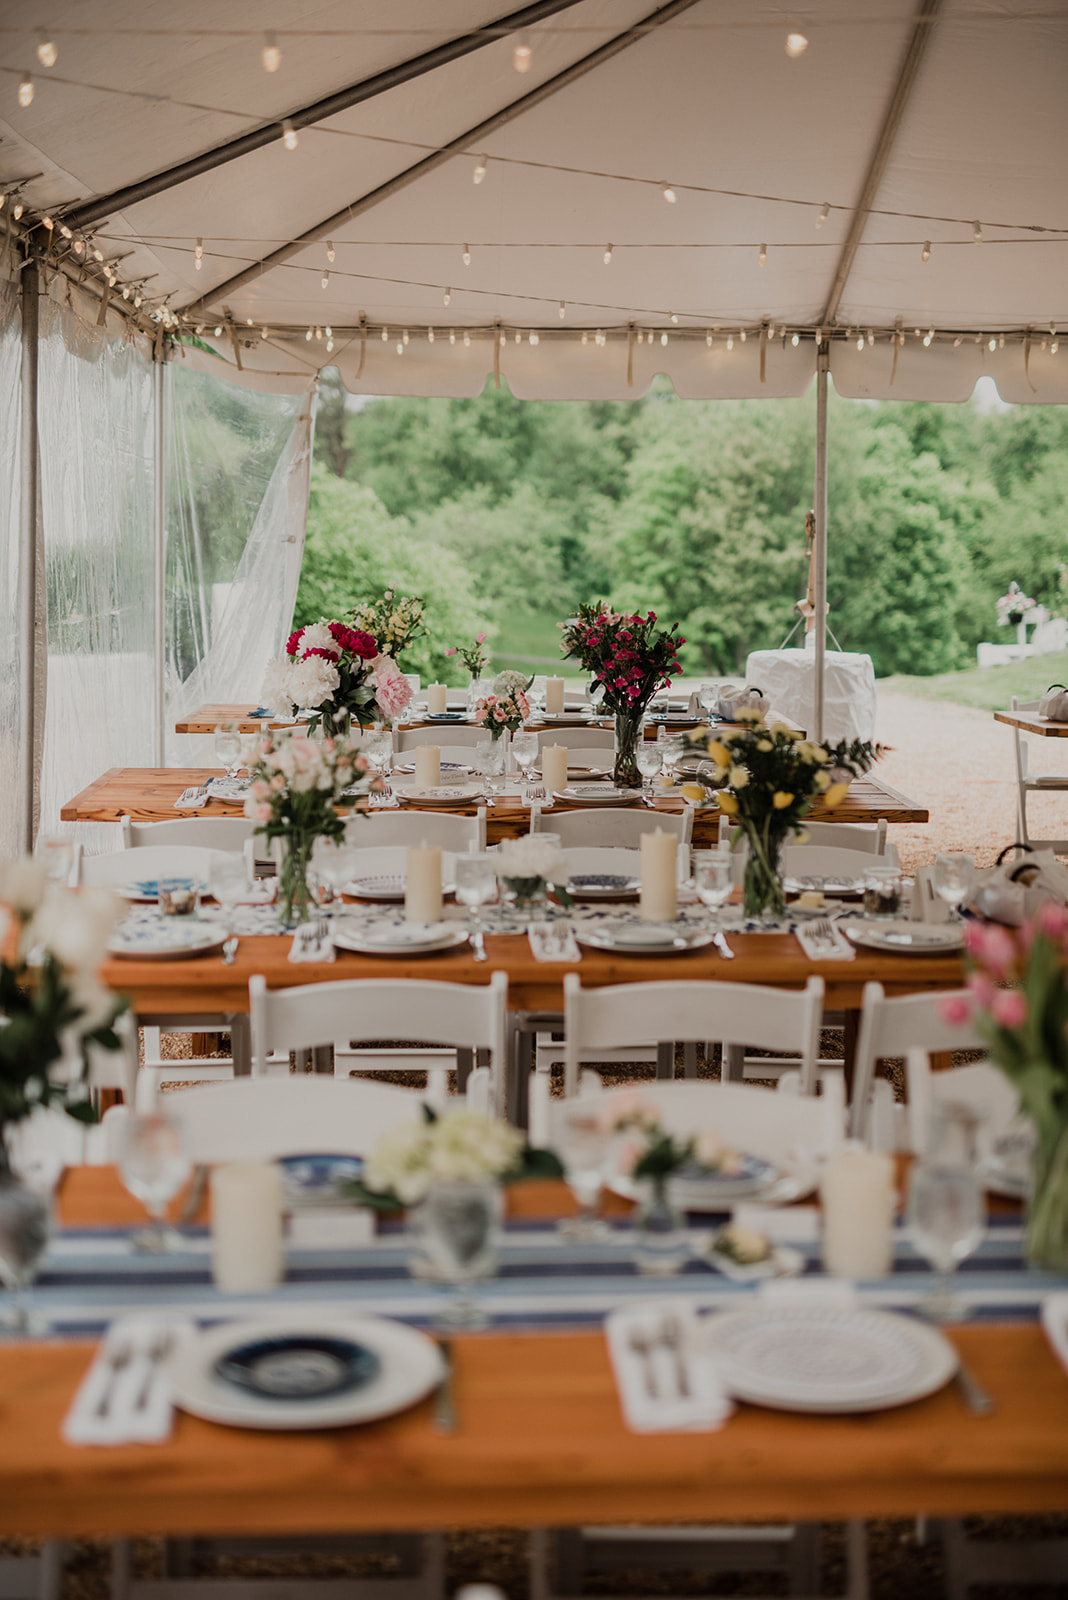 Farm tables are adorned with wildflower bouquets and blue ceramic plates at a wedding reception at Blue Hill Farm in Waterford, VA.